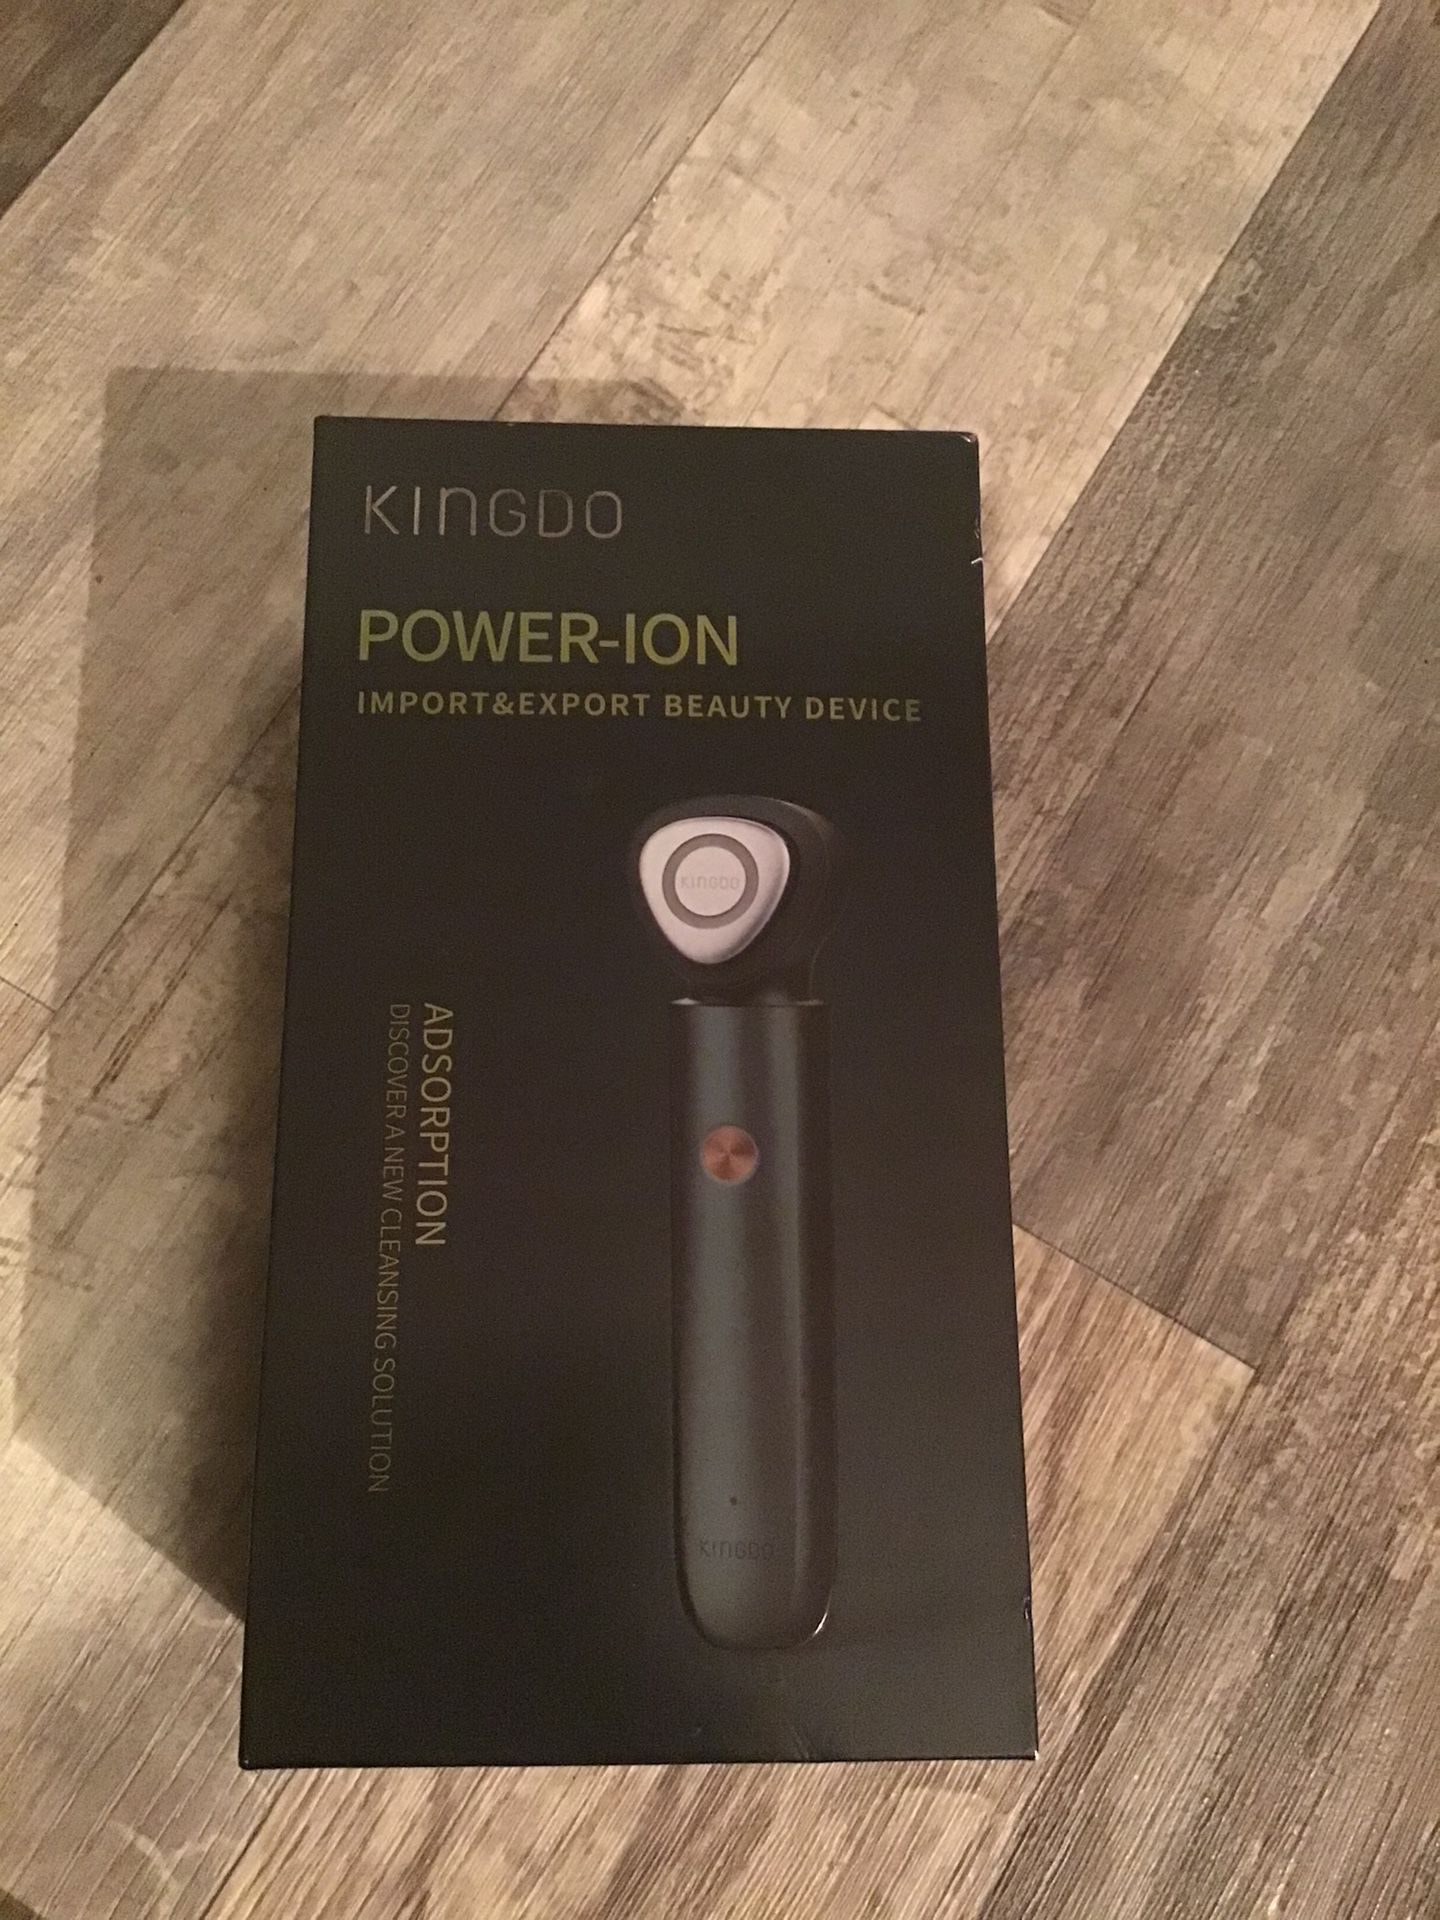 KINGDO power-ion import & export beauty device ( Silver )